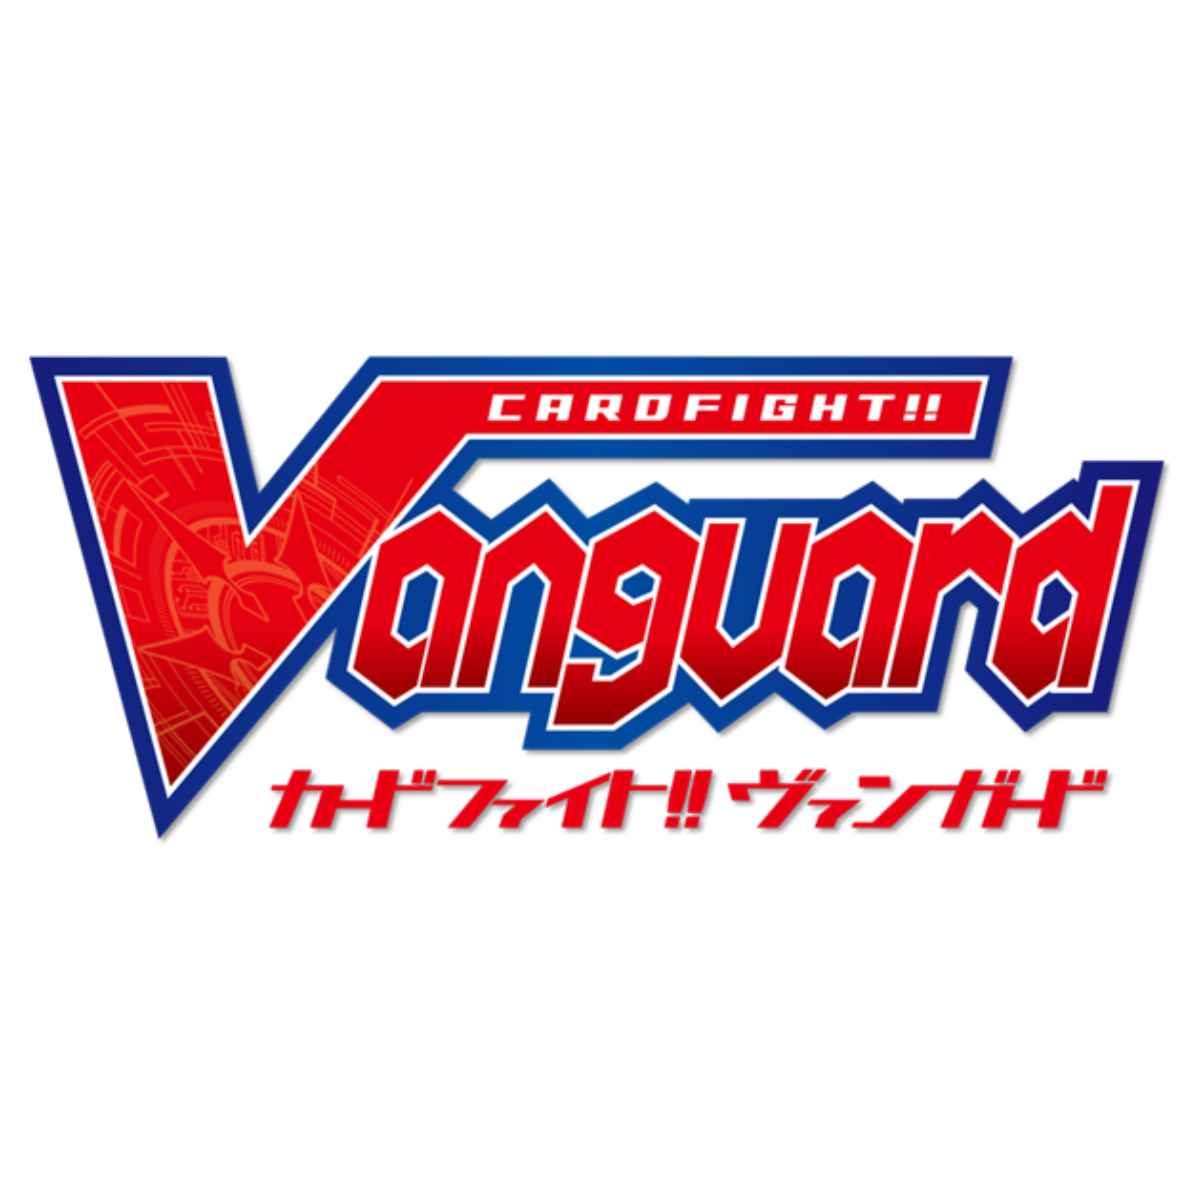 Bushiroad Mini Sleeves Cardfight Vanguard "Dragontree of Ecliptic Decimation, Griphogila" Vol.636-Bushiroad-Ace Cards & Collectibles